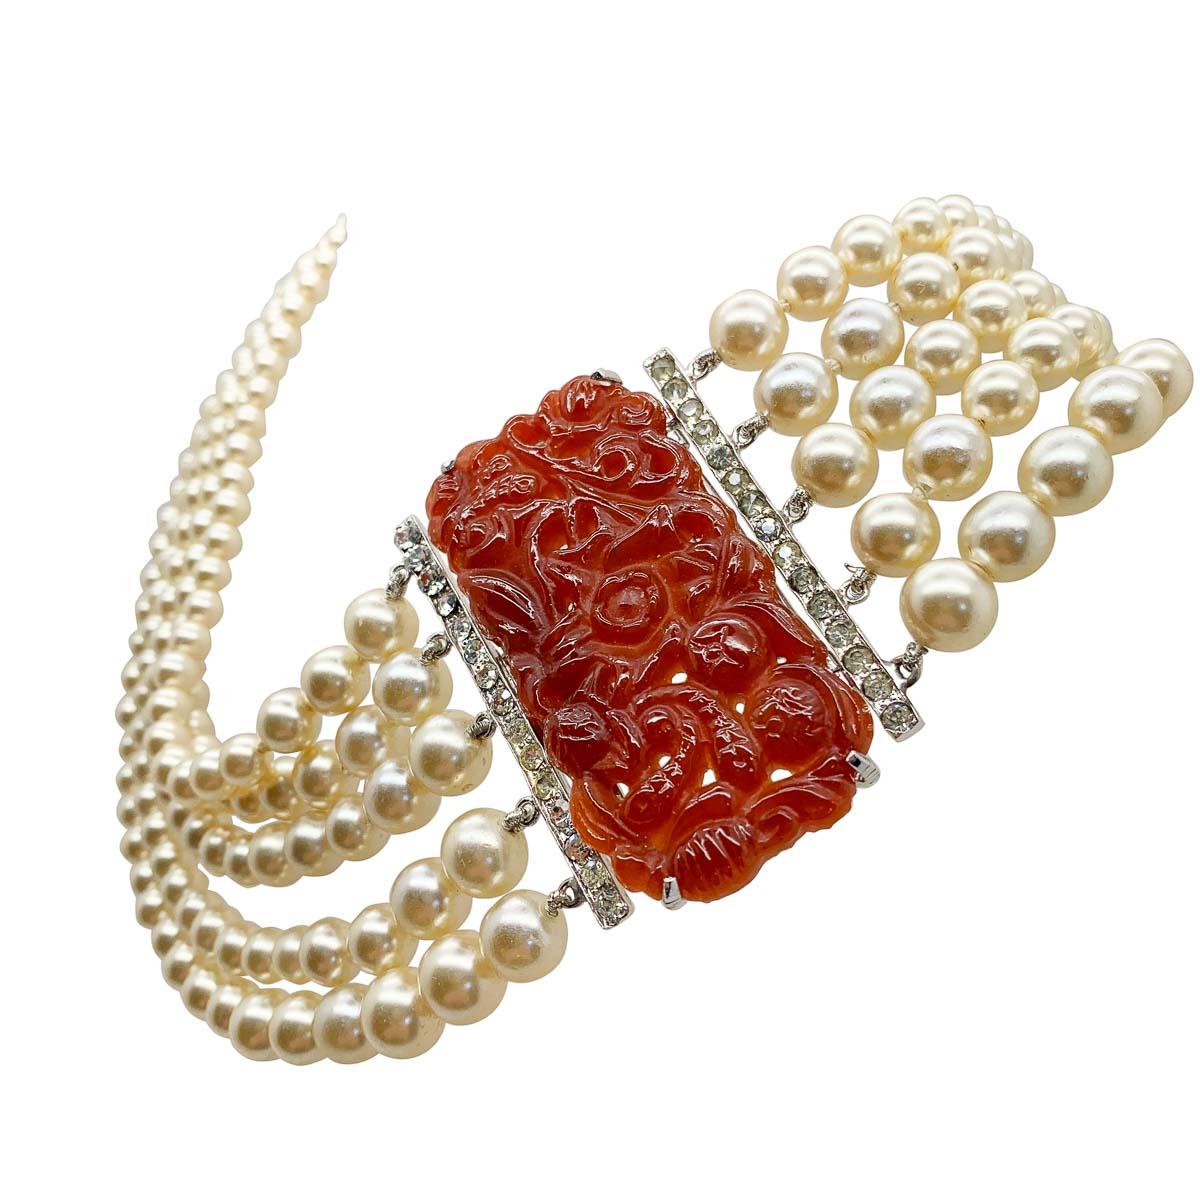 A rare and breath-taking vintage Eisenberg carved plaque necklace from the 1940s. Featuring a splendid five lustrous strands of graduated glass pearls. The crowning glory of this piece, an important and impactful art deco style carved carnelian